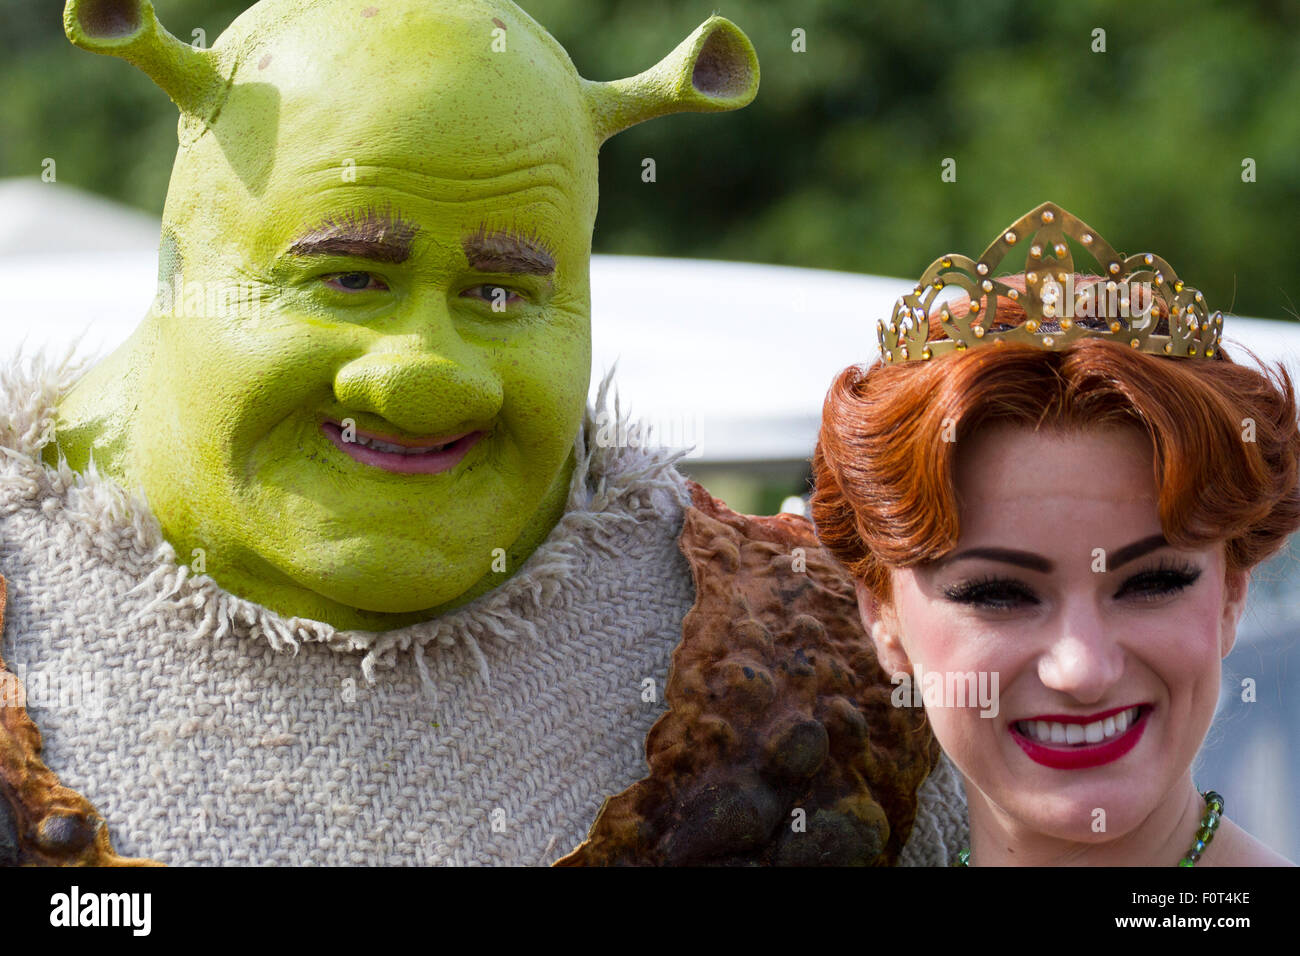 Shrek & Fiona actors entertaining the crowds at Southport Flower Show.  Britain’s biggest independent flower show, celebrates with a carnival-like celebration of themed events, entertainment, food and floral marquees will all be inspired by fil star culture and design. Stock Photo